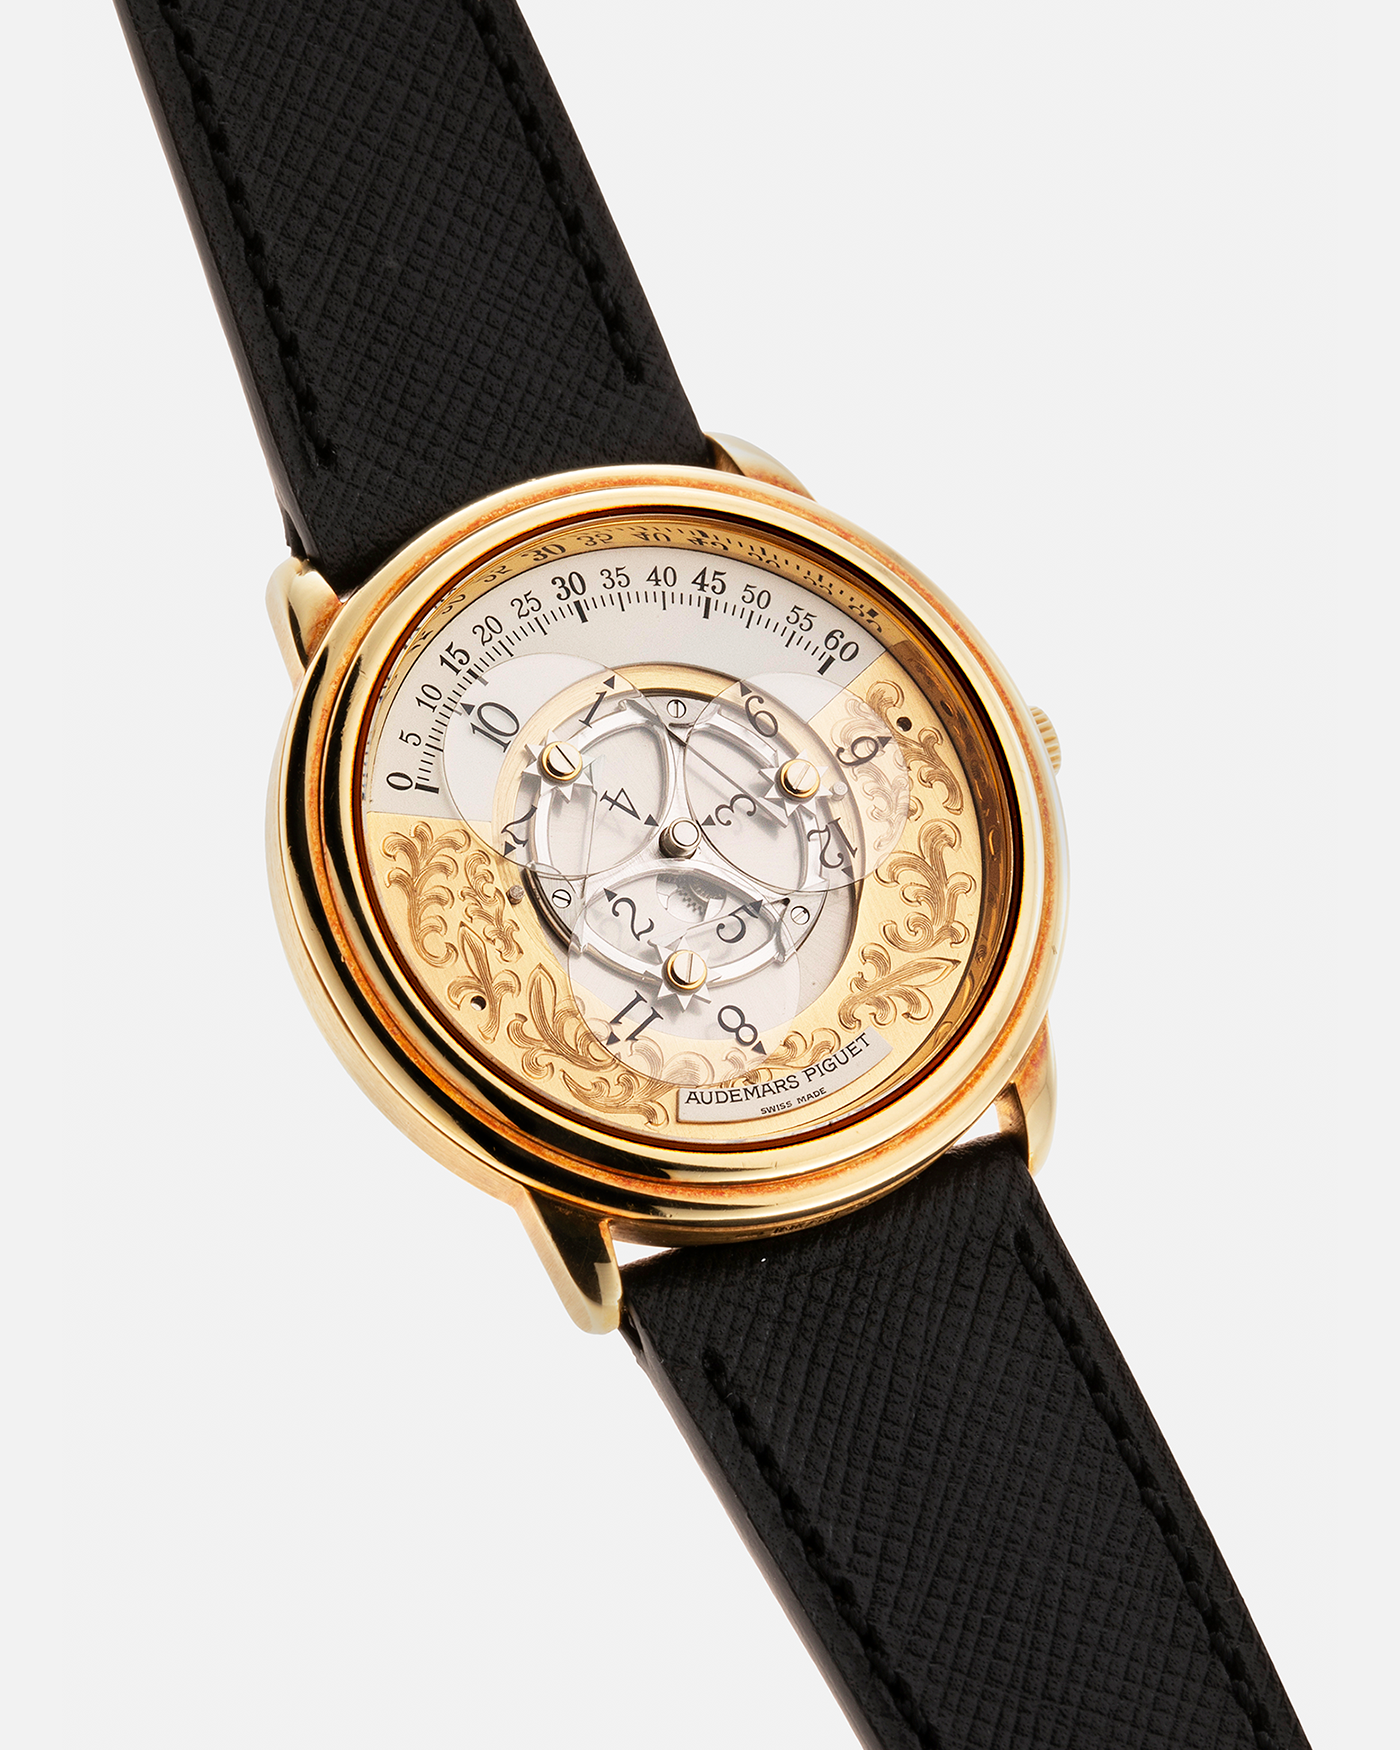 Brand: Audemars Piguet Year: 1990’s Model: Star Wheel Reference Number: 25720BA Material: 18-carat Yellow Gold  Movement: AP Cal. 2224, Self-Winding Case Diameter: 36mm Strap: Molequin Black Textured Calf Leather Strap with 18-carat Yellow Gold Signed Deployant Clasp